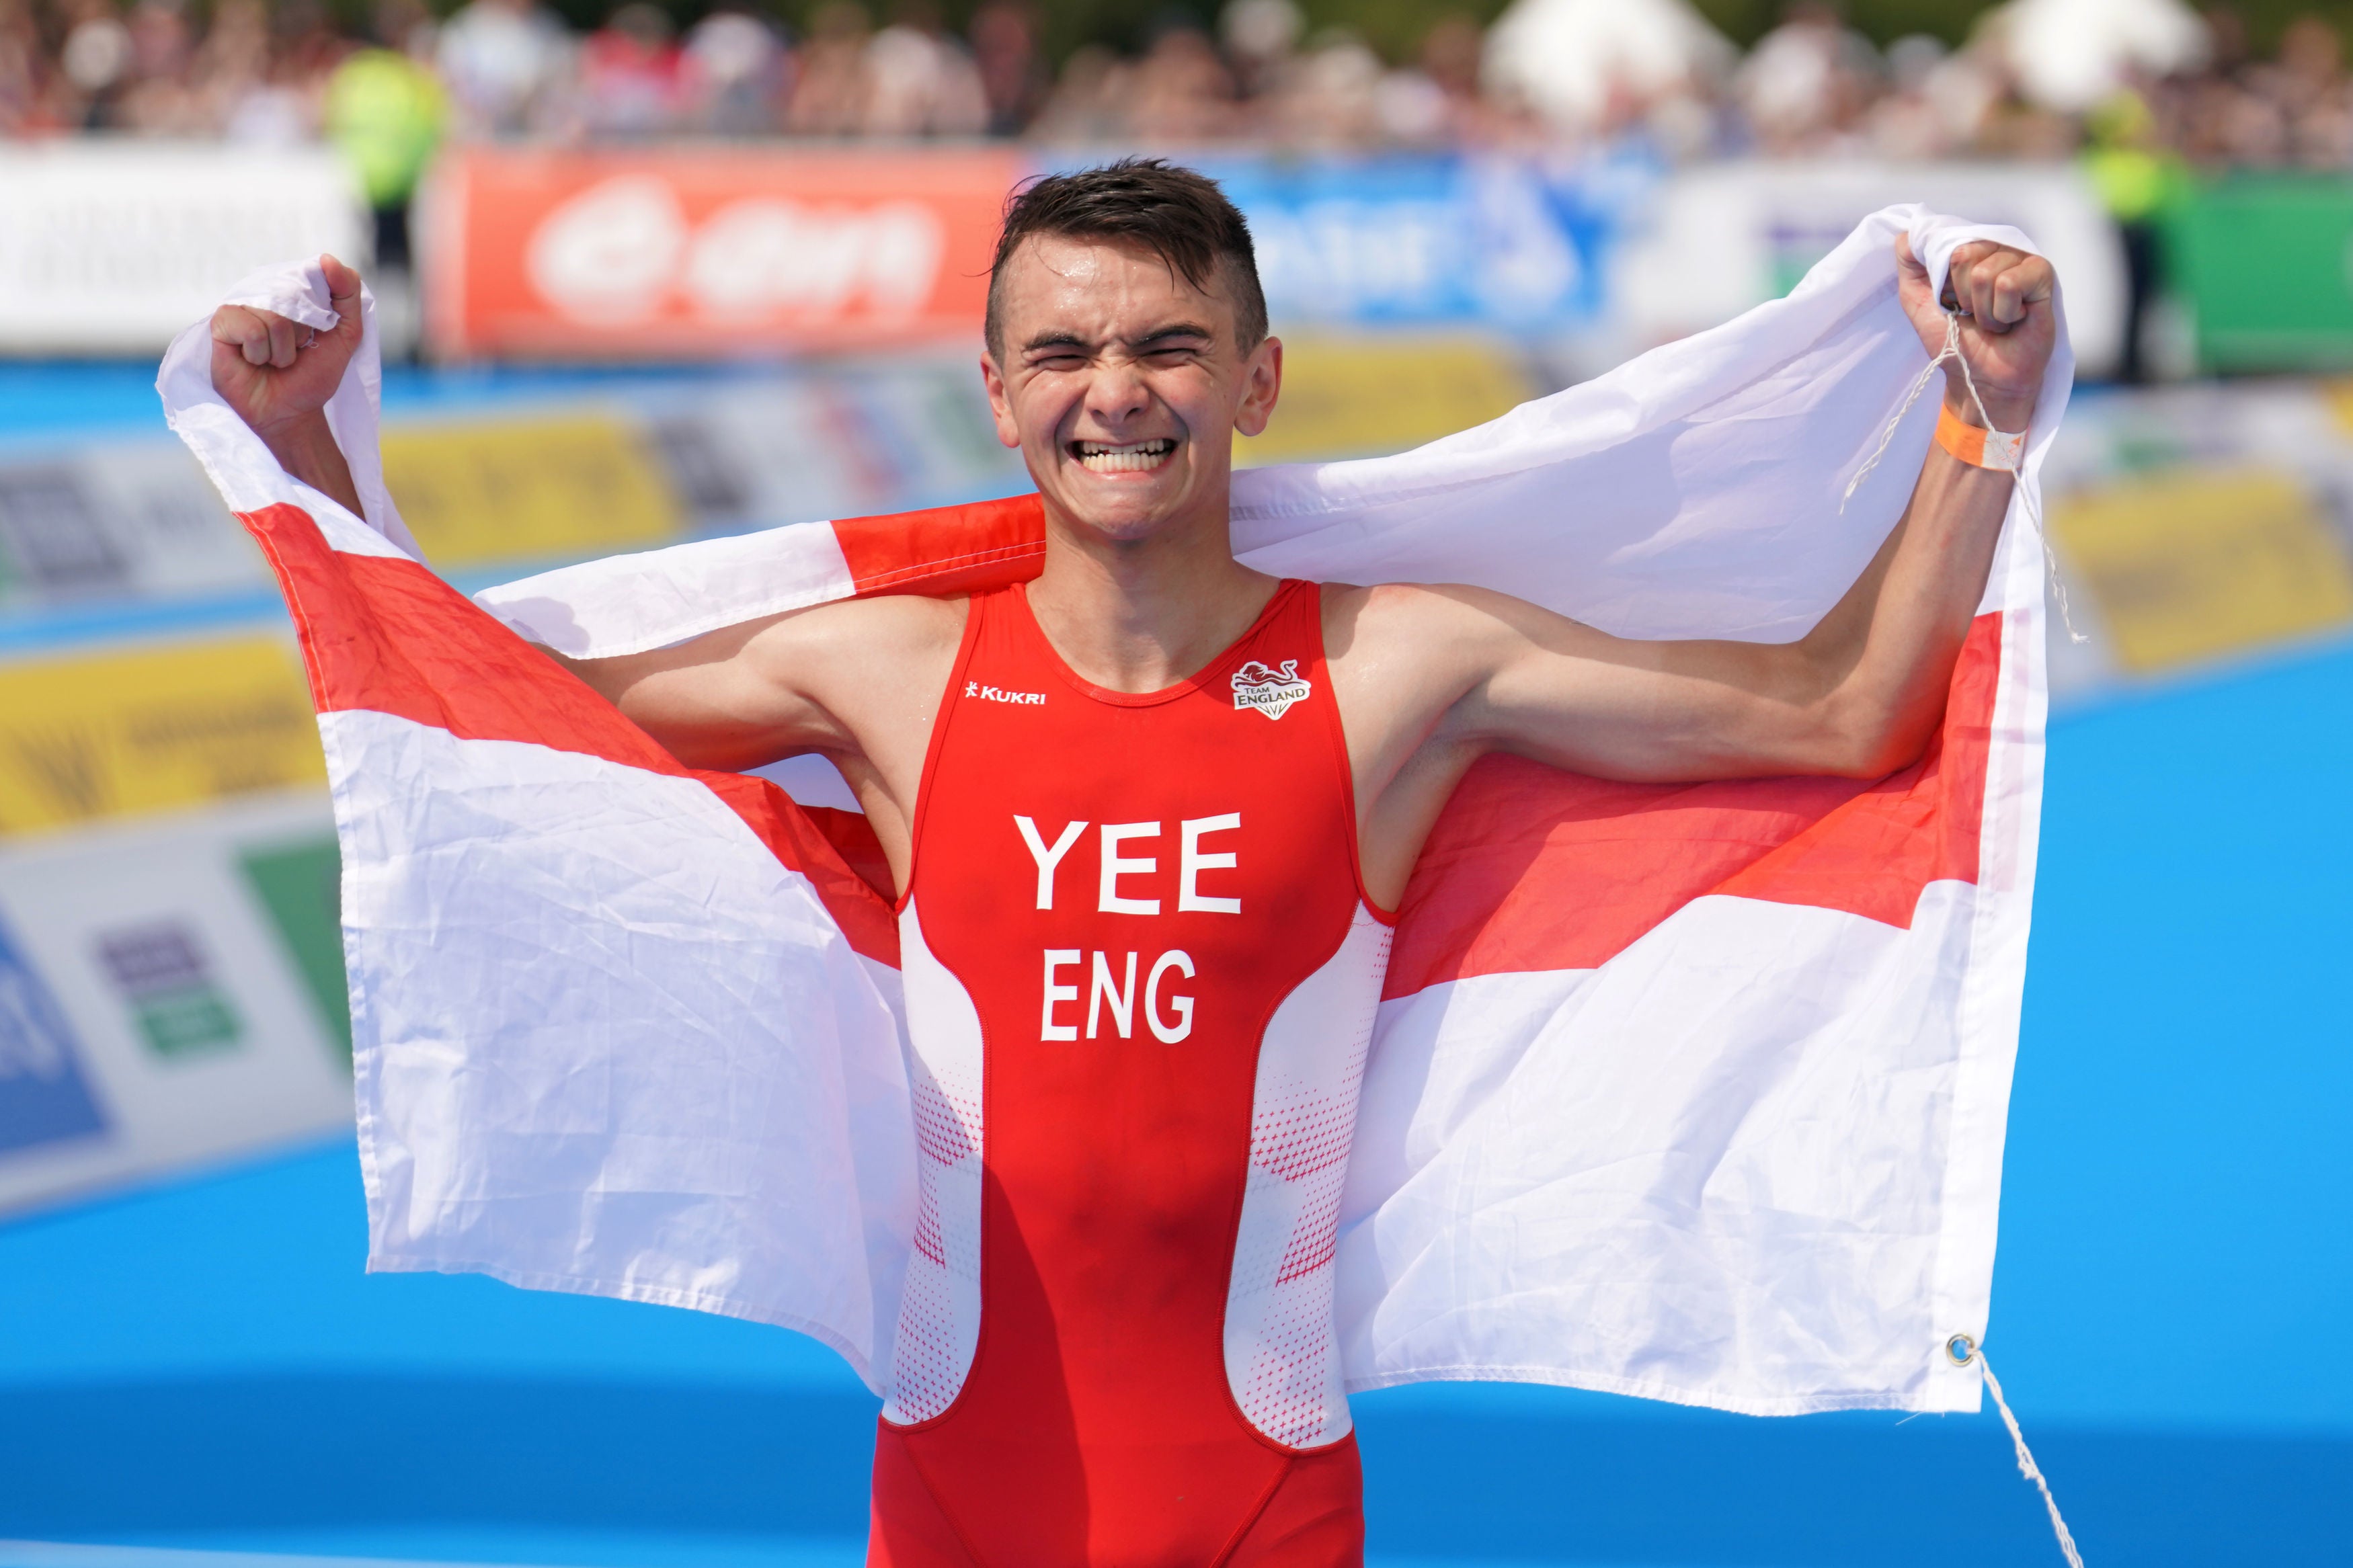 Alex Yee won triathlon gold at the 2022 Commonwealth Games following his silver medal outing at the previous Olympics